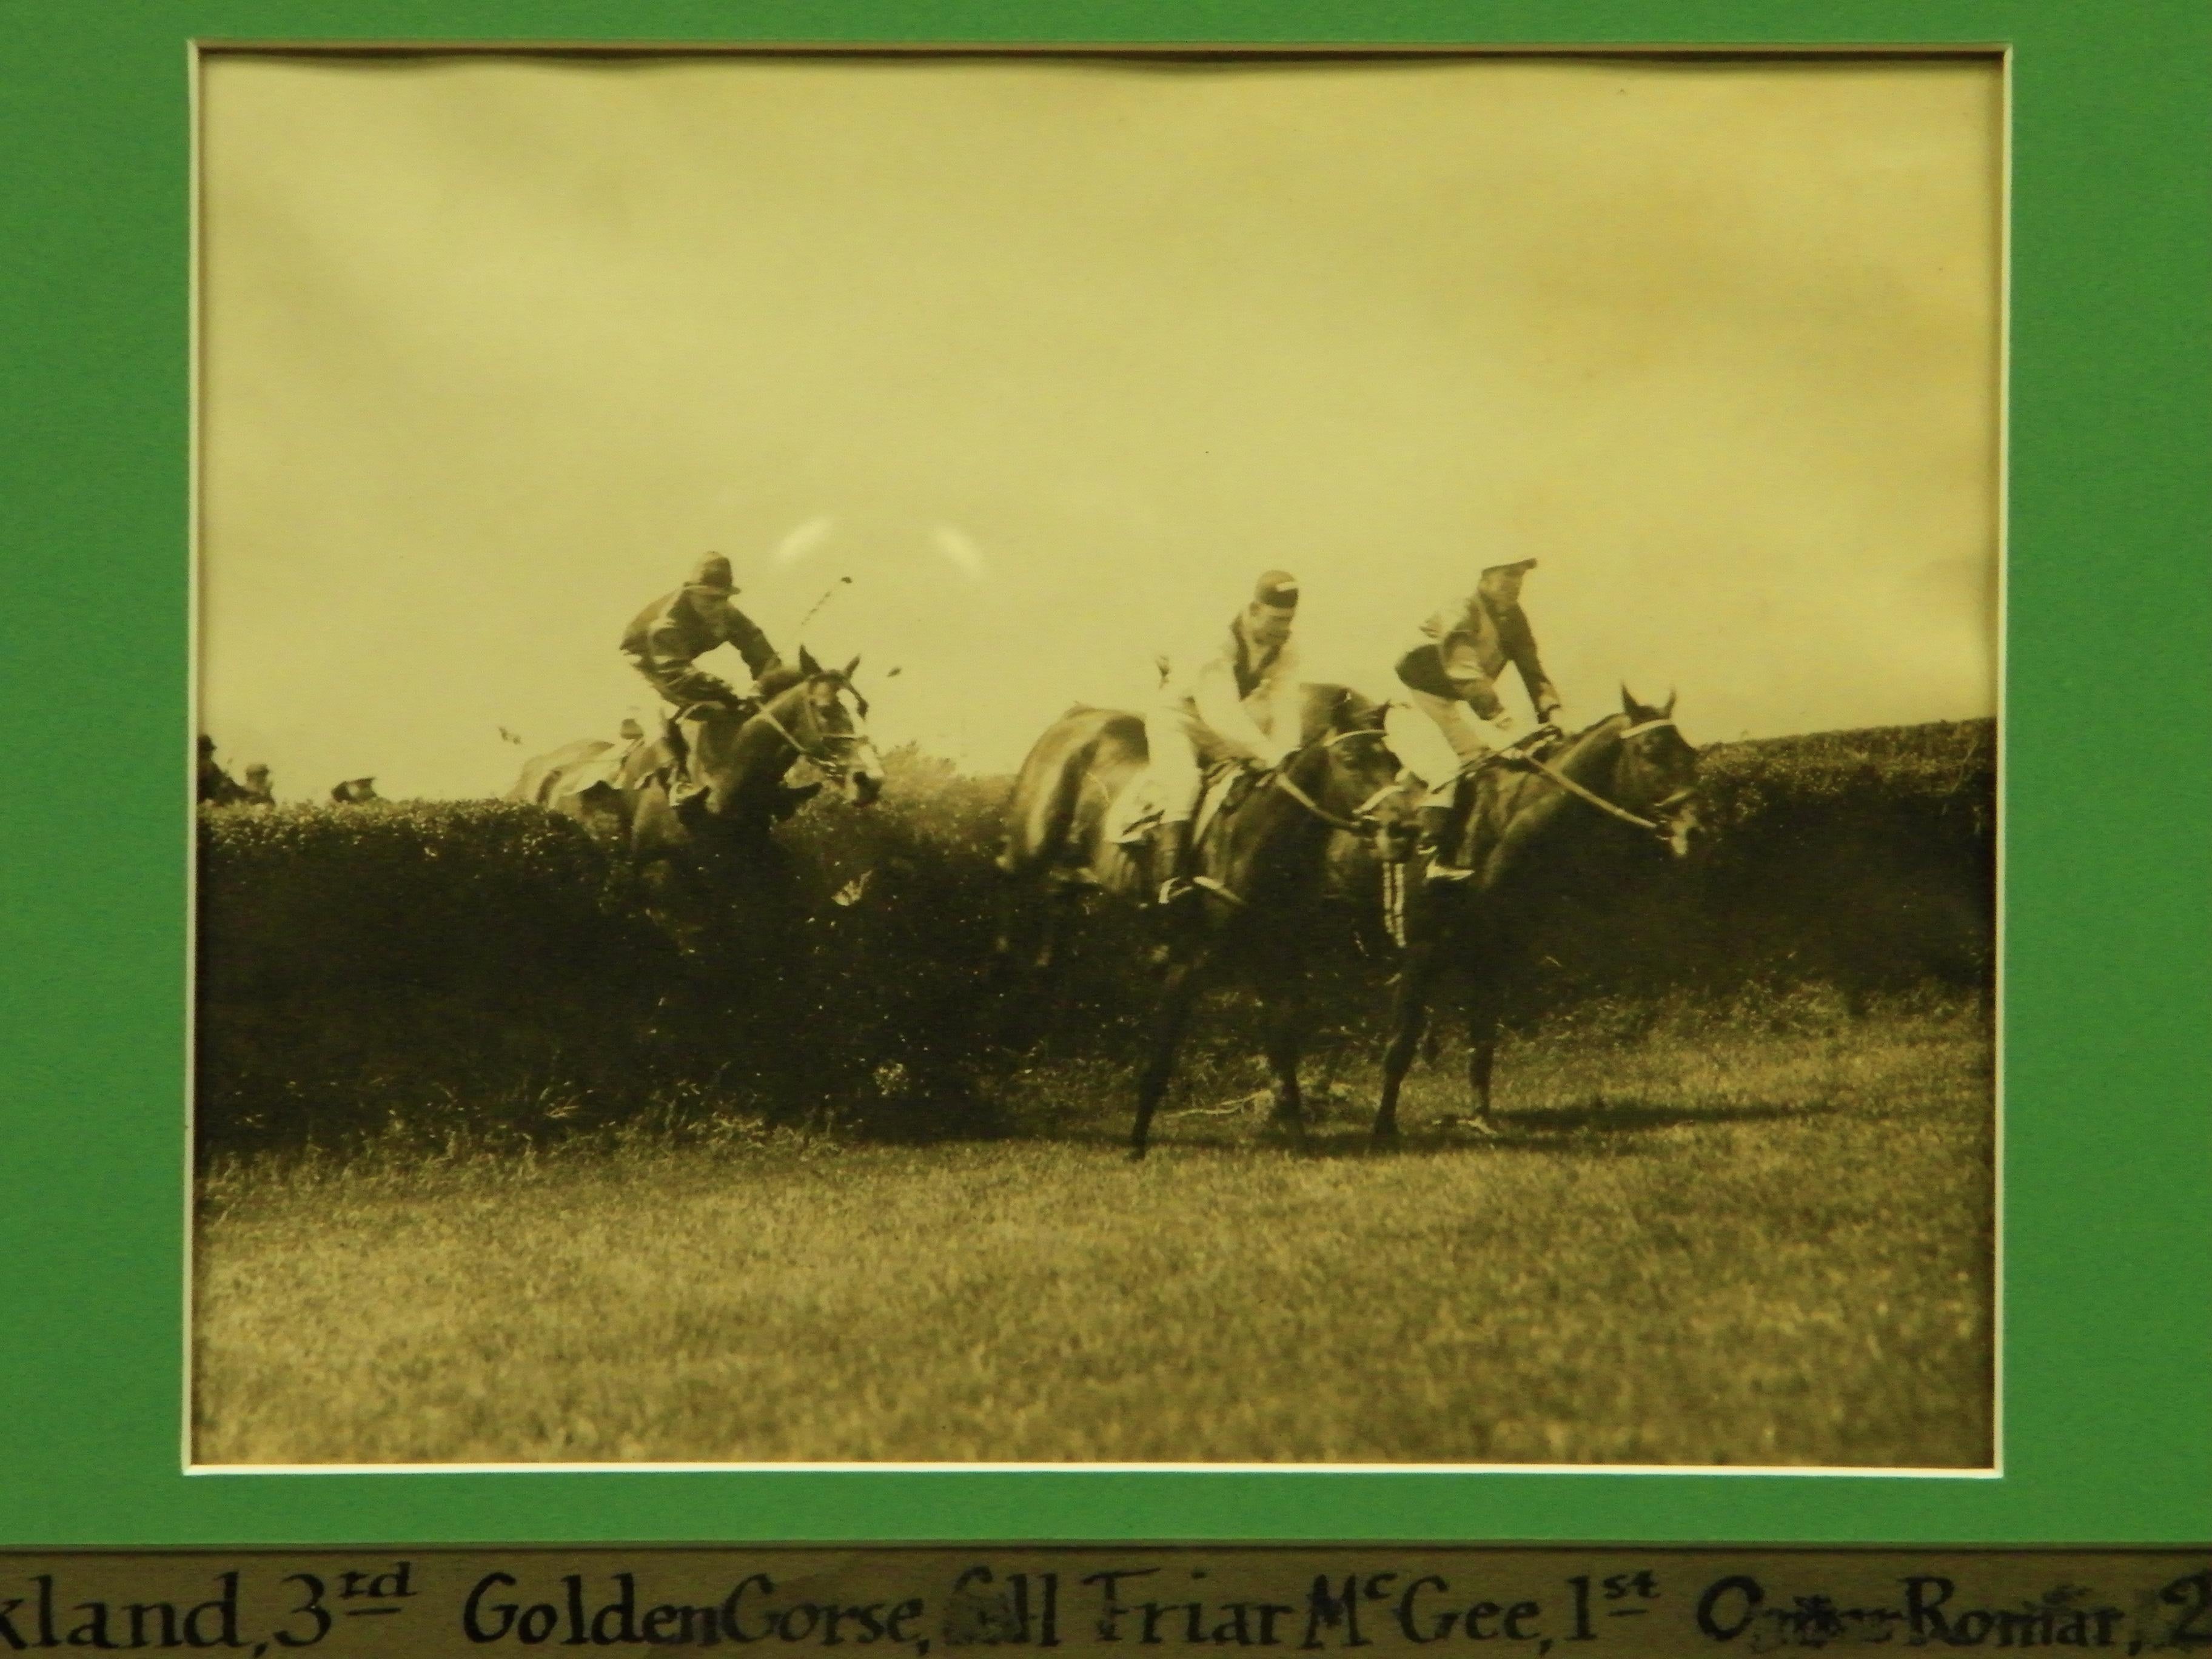 Classic original B&W framed photo of 'The Hyde Park Steeplechase' at Belmont Park from May 26, 1930

Photo Sz: 8 3/4